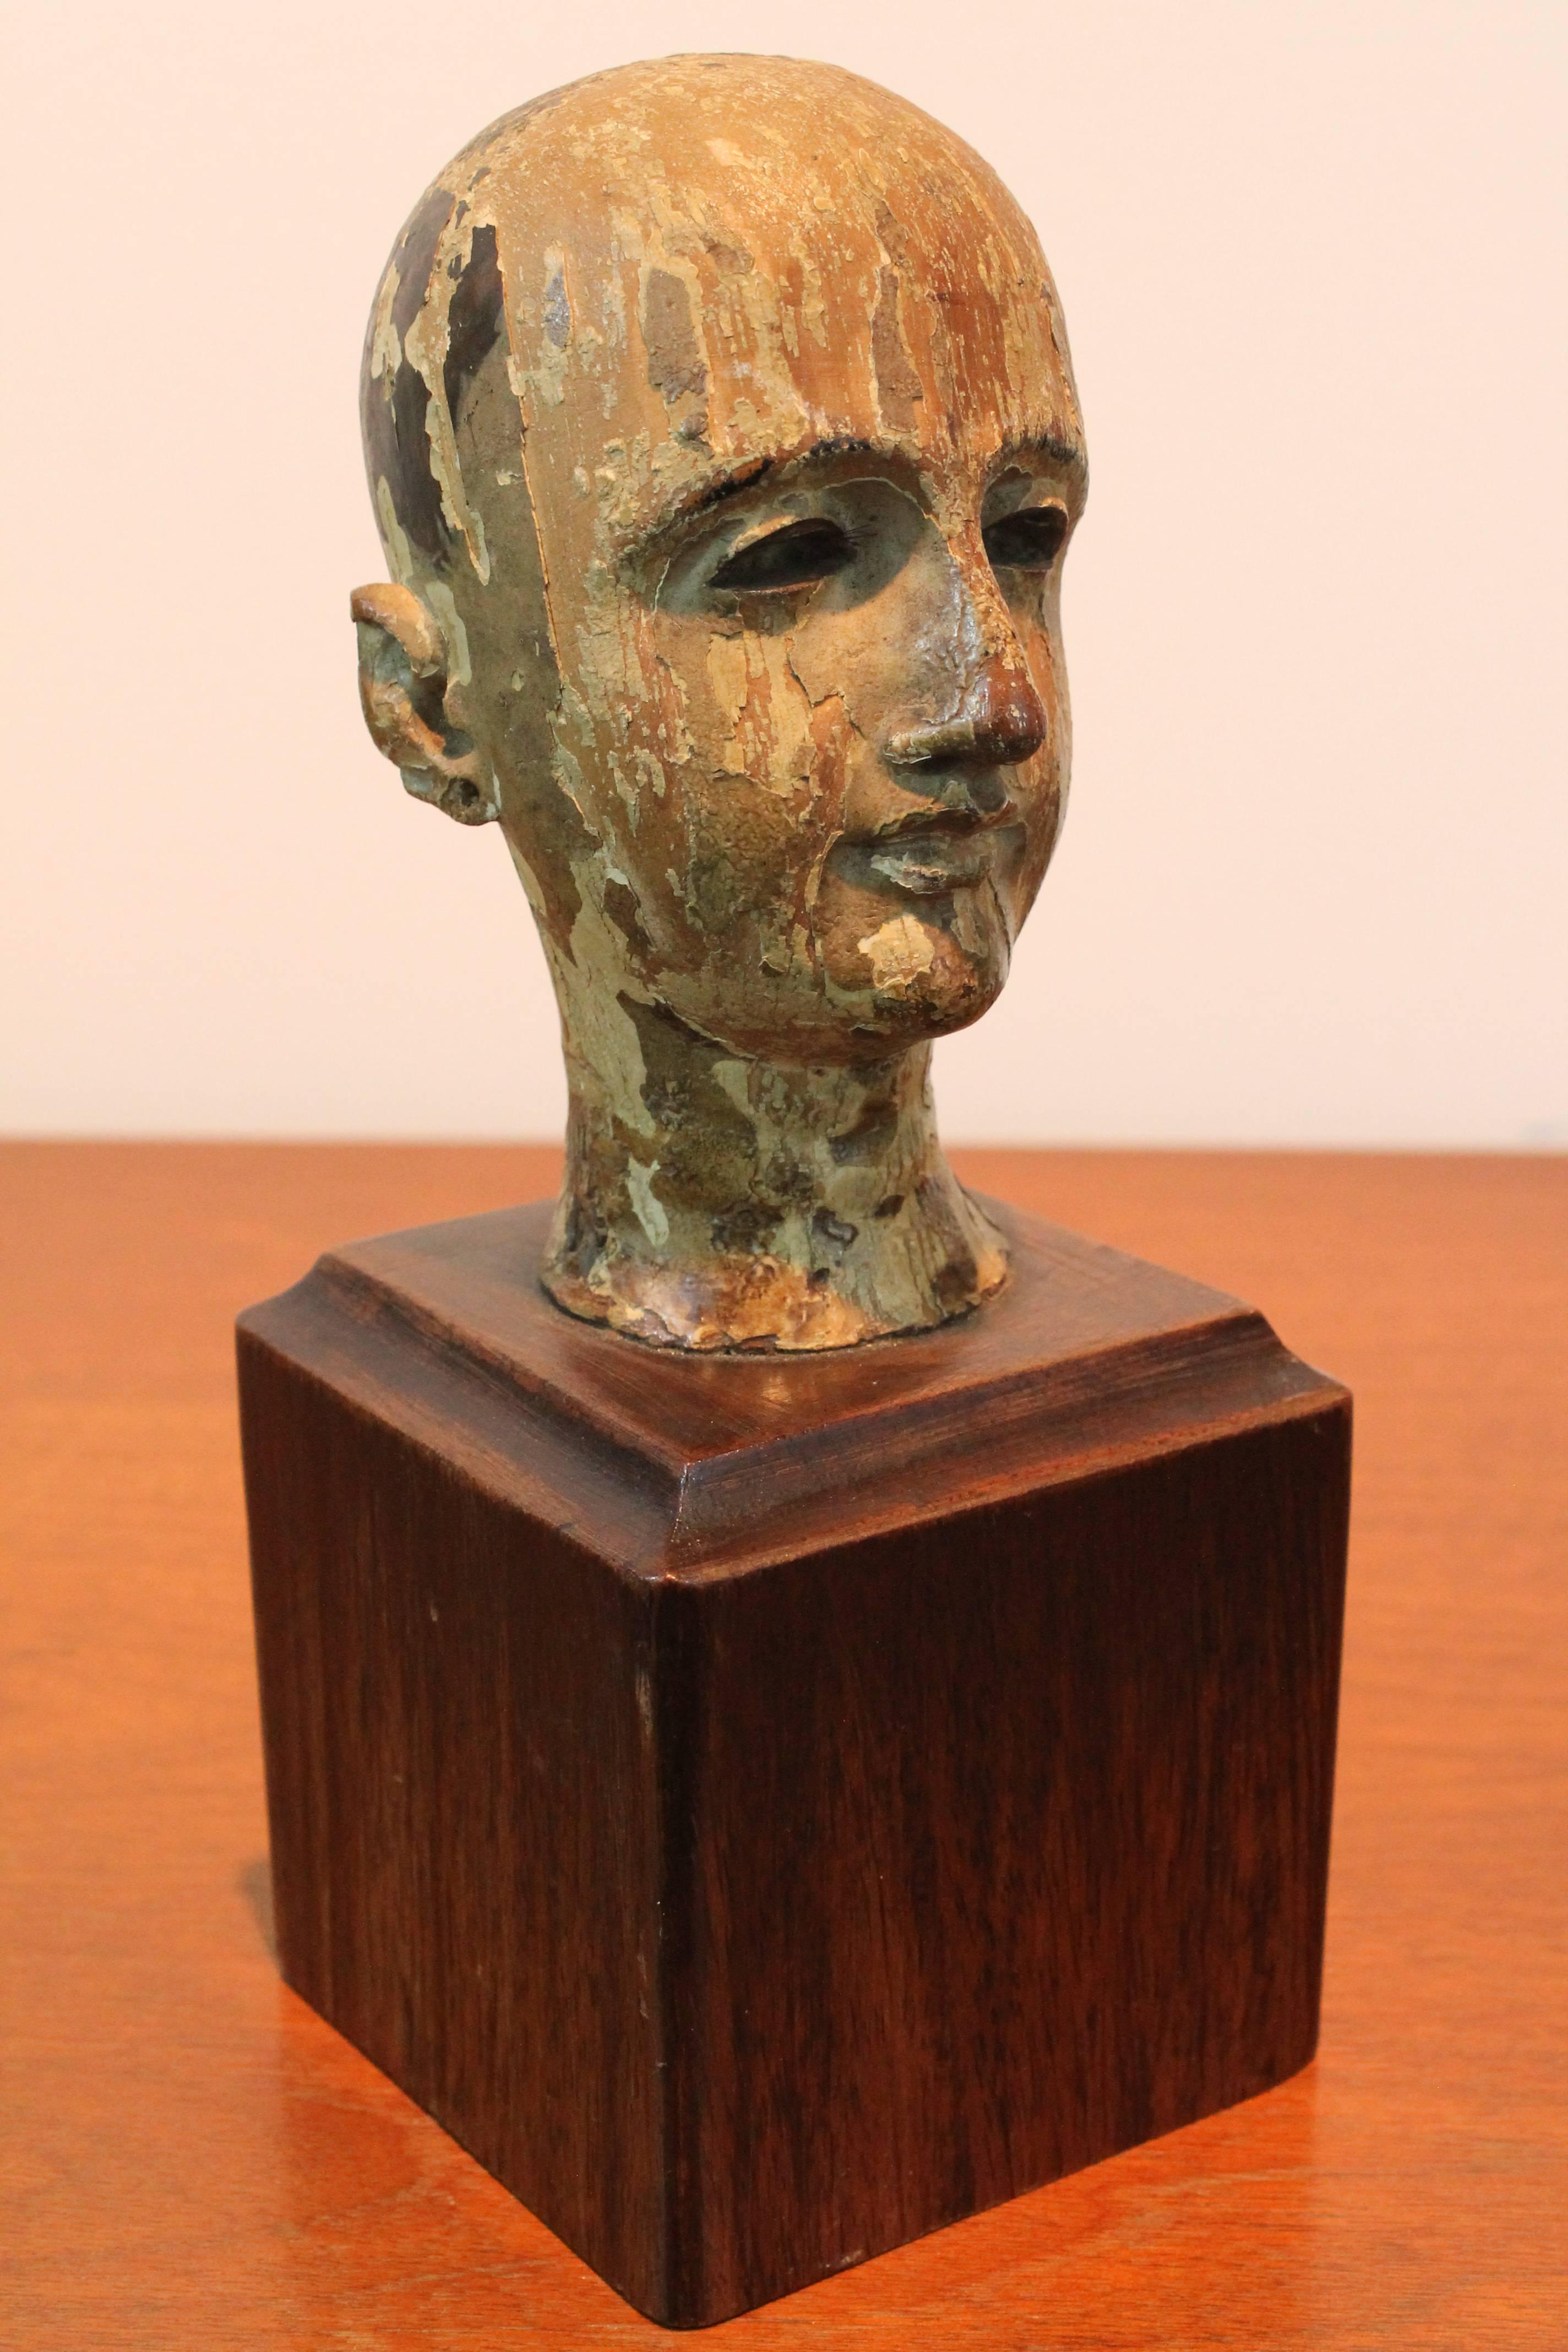 Exceptional surface and delicately detailed carving on this 19th century polychromed Santos head.
There were originally glass eyes which have long been gone, but their absence creates a haunting and powerful presence.
Mounted on a walnut plinth